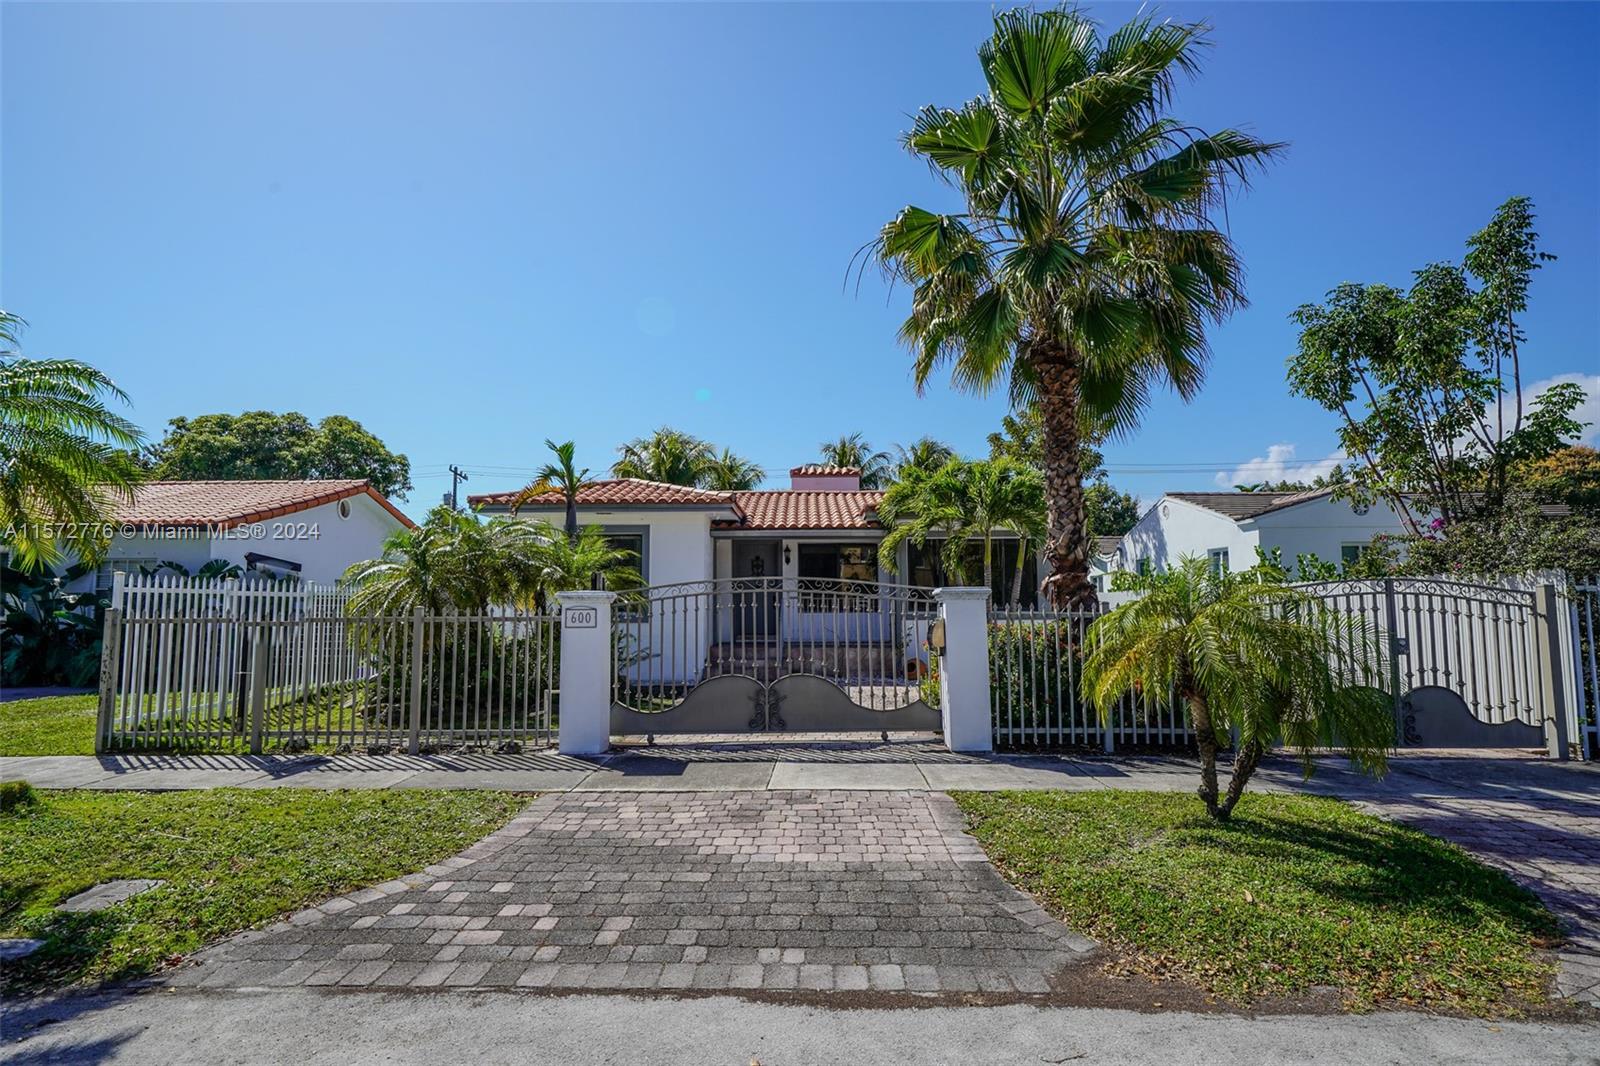 AMAZING LOCATION CLOSE TO MIAMI DOWNTOWN! This fully remodeled home features 4 Bedrooms & 3 Full Baths; features a wonderful swimming pool with a Jacuzzi to enjoy Miami's beautiful summers. There is an extra bathroom by the pool. Fenced-in backyard with a paved terrace that is perfect for entertainment, barbecuing, and hosting friends and family. Updated kitchen with stainless steel appliances, Hurricane-impact windows, and doors, plus a large driveway. Located close to the center of vibrant and lively Miami Downtown, shopping centers, and restaurants. Don’t miss out on this centrally-located family home. Amazing private and secluded home with a private garden with pool & Jacuzzi only for you, relax in the lush tropical backyard, enjoy the pool and jacuzzi.